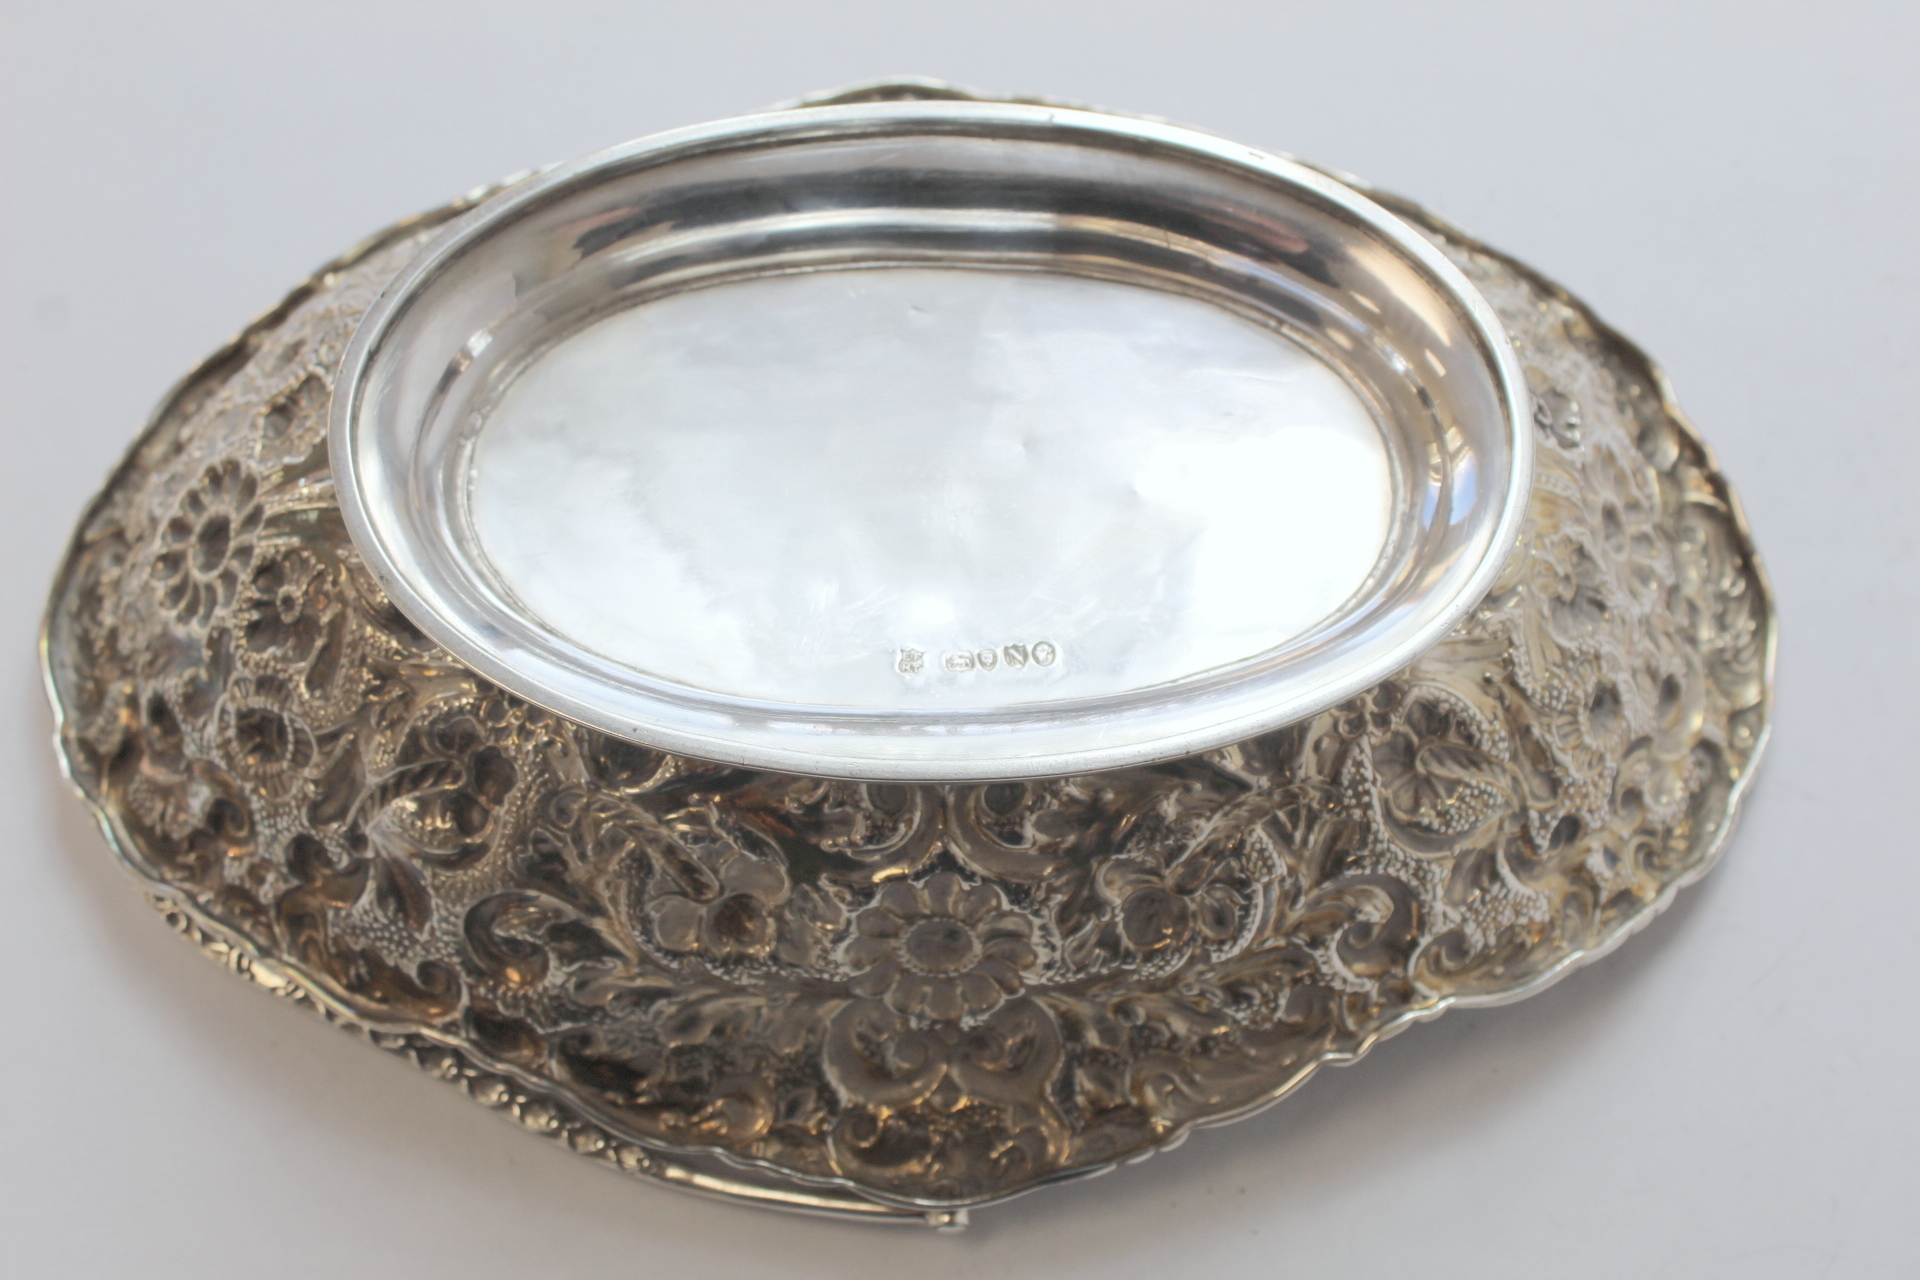 Silver cake basket oval with embossed scrolls and flowerheads by Finley & Taylor 1888. 9oz. - Image 3 of 4